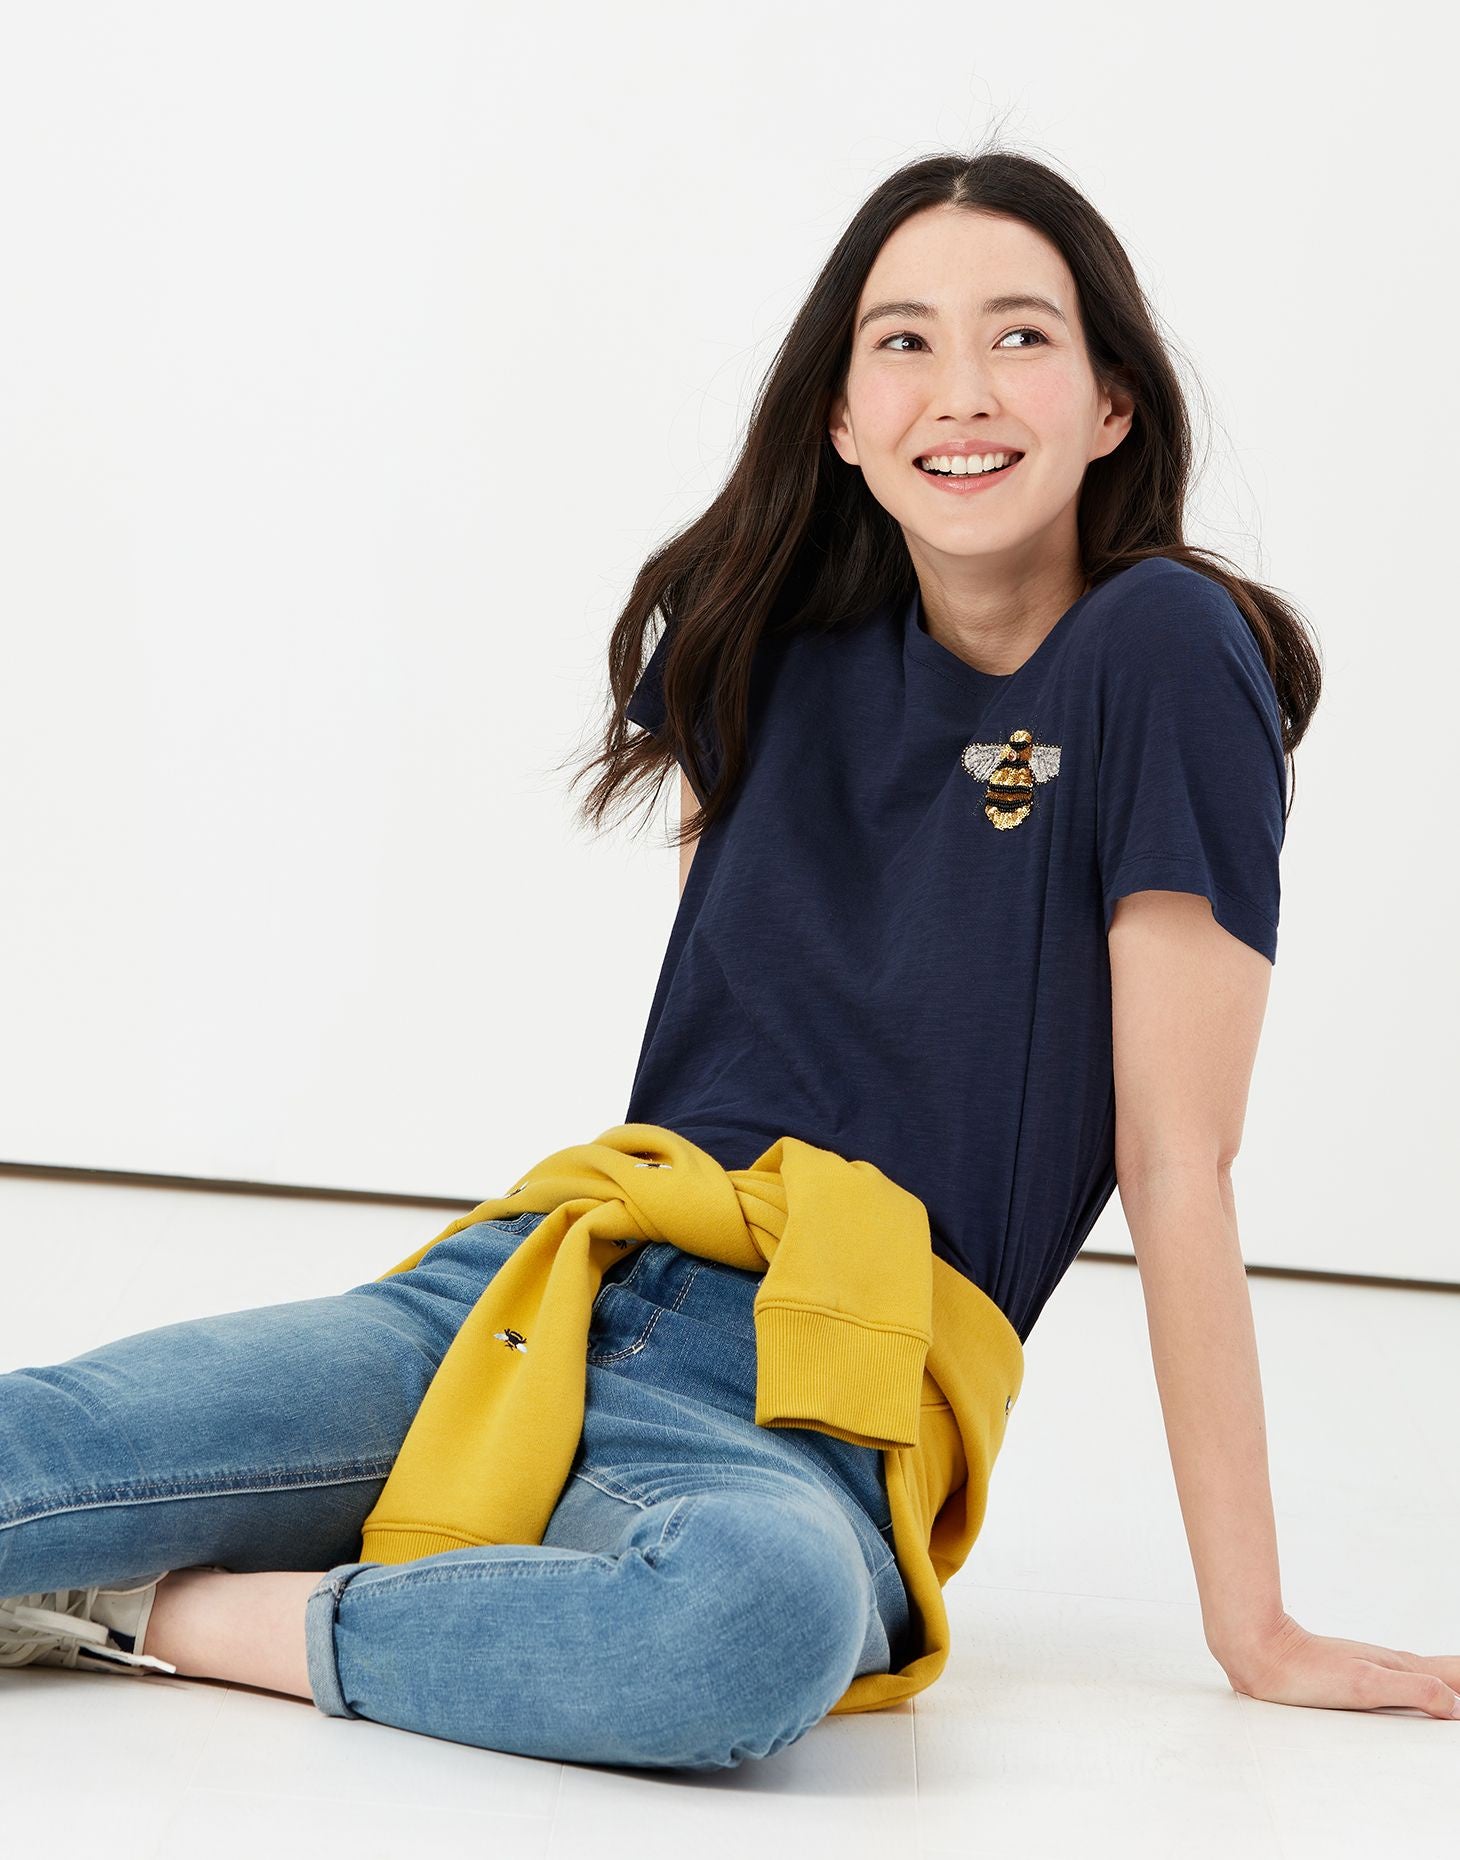 Carley Embroidered Classic Crew T-Shirt - Navy Bee